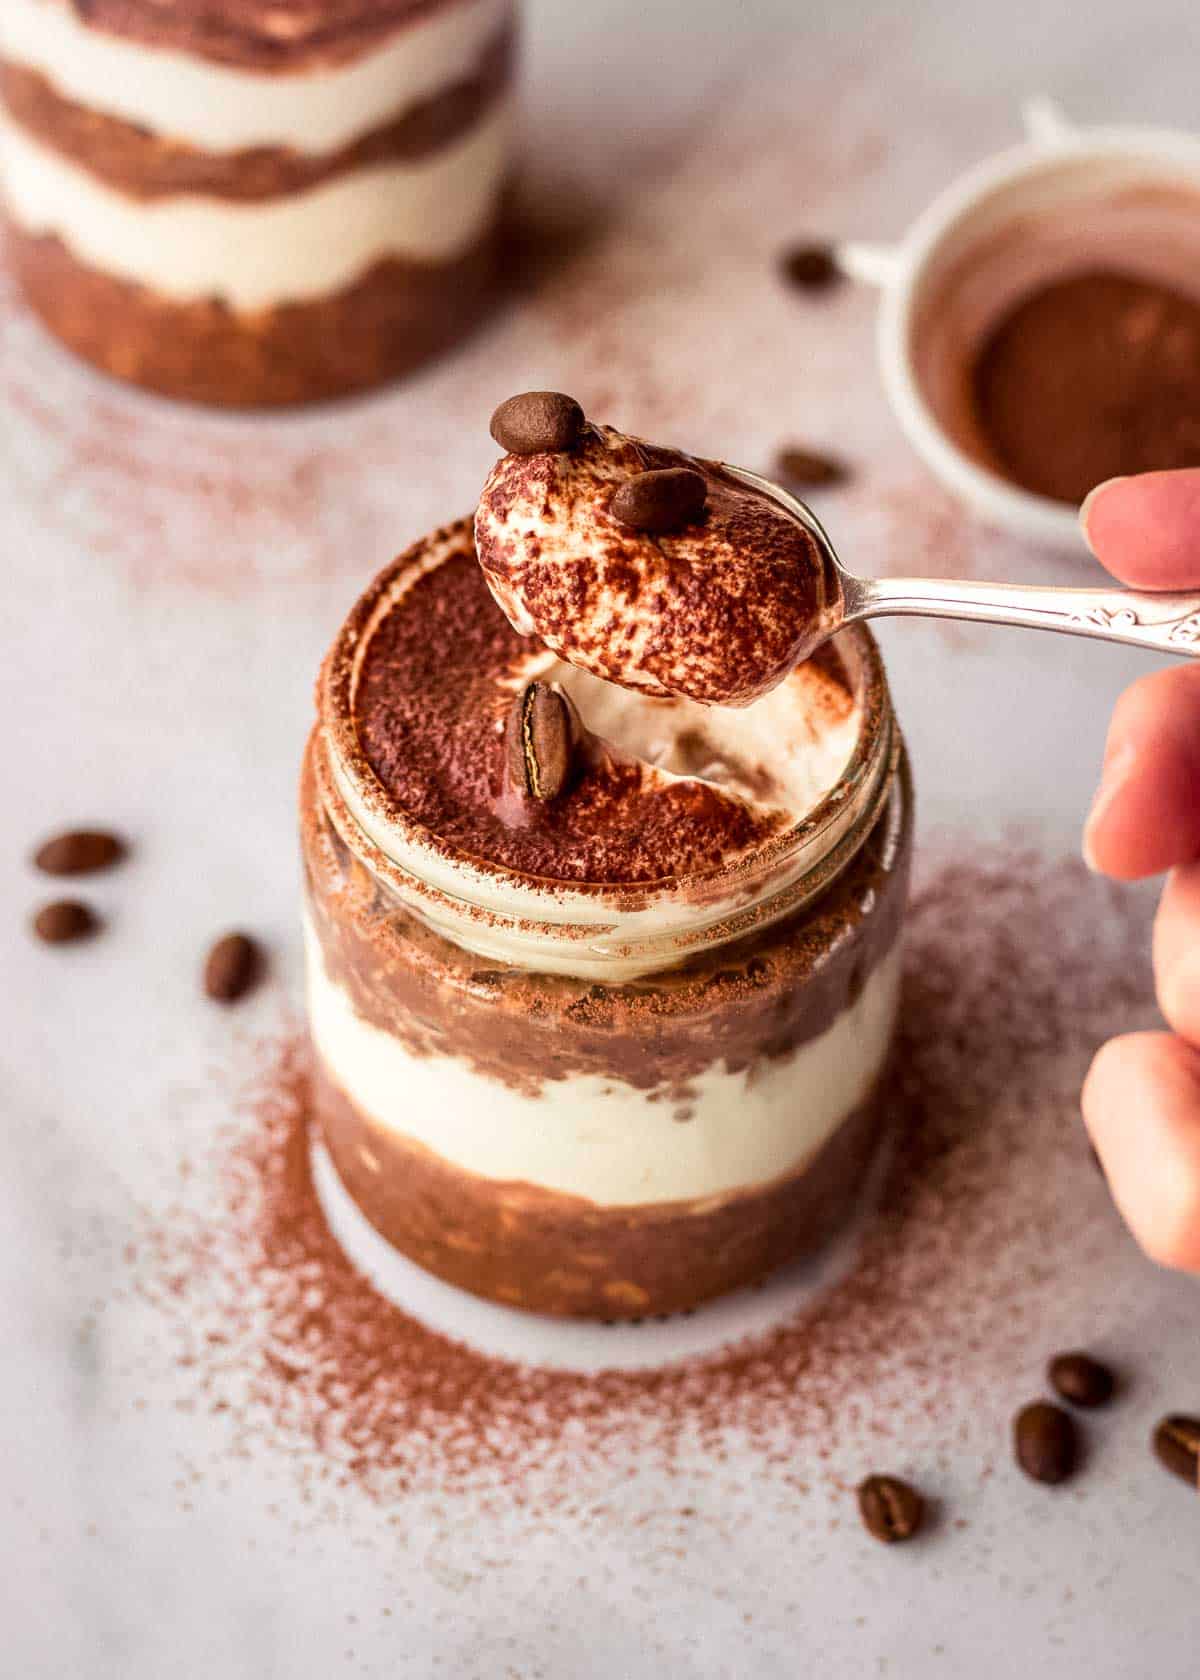 A woman takes a spoonful of tiramisu overnight oats from a glass jar, decorated with coffee beans and cacao powder.